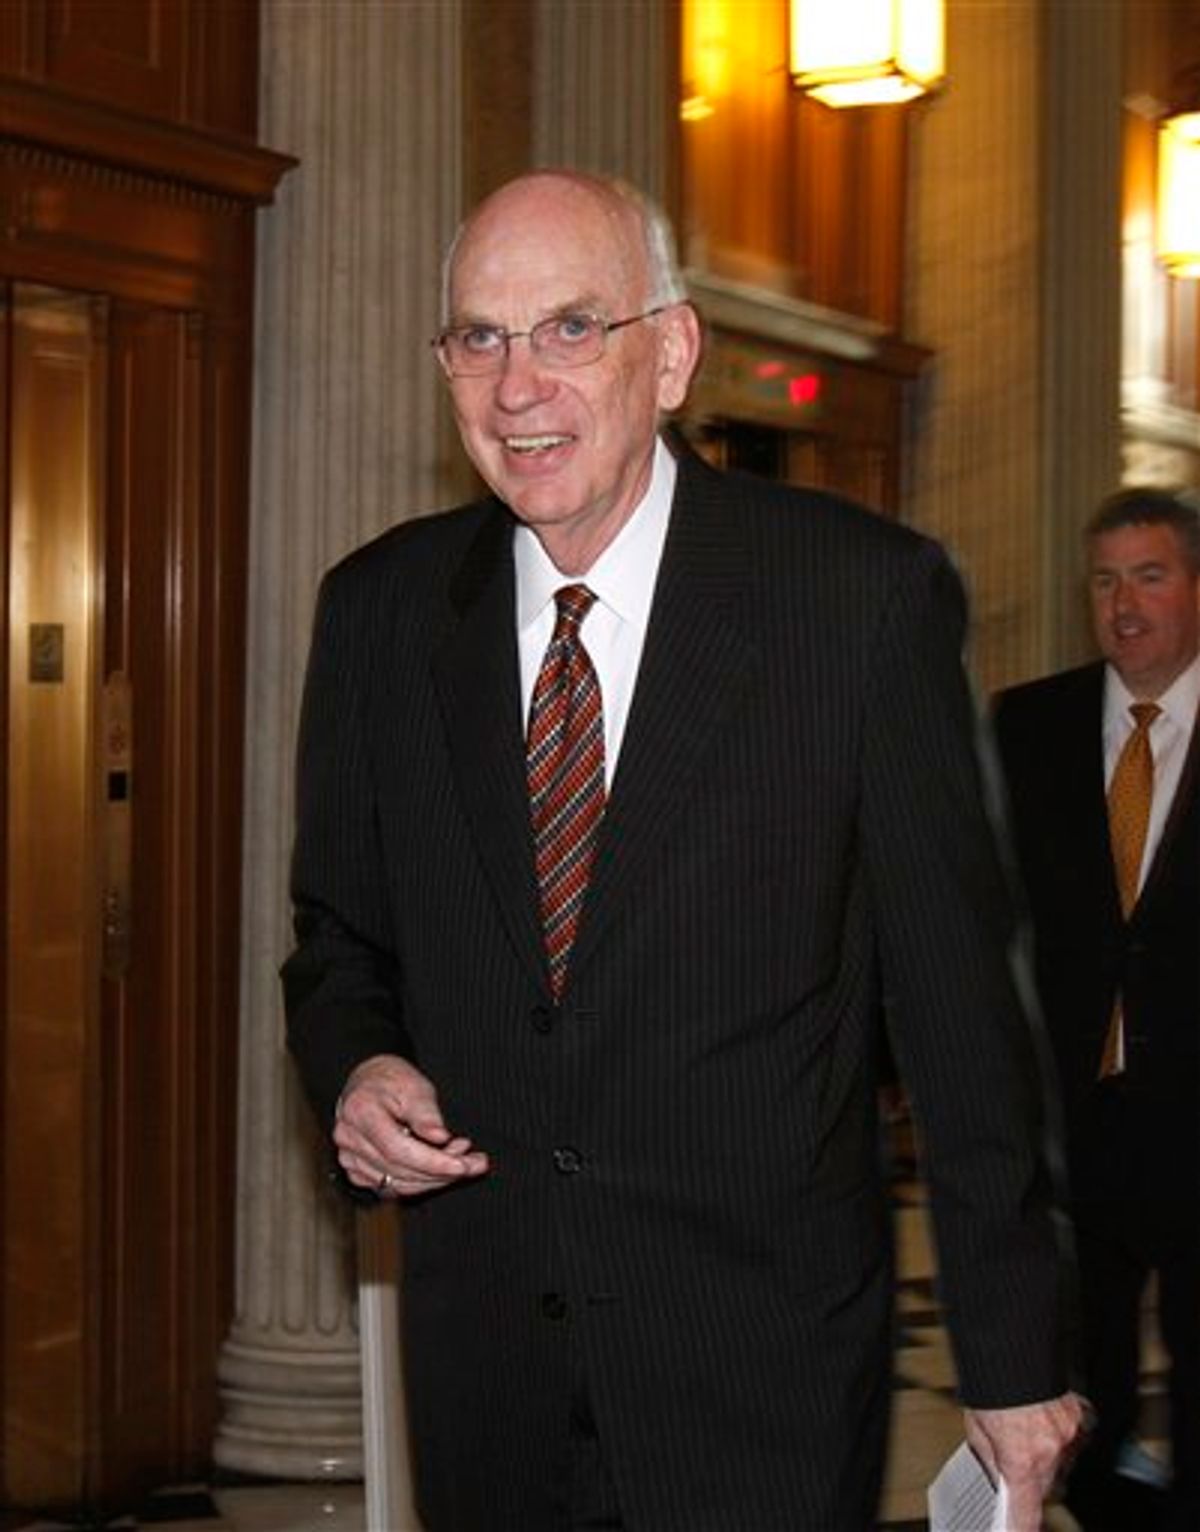 In this May 13, 2009, photo, Sen. Bob Bennett R-Utah, walks to the Senate Chamber on Capitol Hill in Washington. Bennett, darling of the National Rifle Association and grandson of a Mormon Church president, suddenly may not be conservative enough for ultraconservative Utah. He could become the first 2010 election casualty among incumbent U.S. senators if he fails to win at least 40 percent of the 3,500 delegates at the state GOP's convention May 8. (AP Photo/Harry Hamburg) (AP)